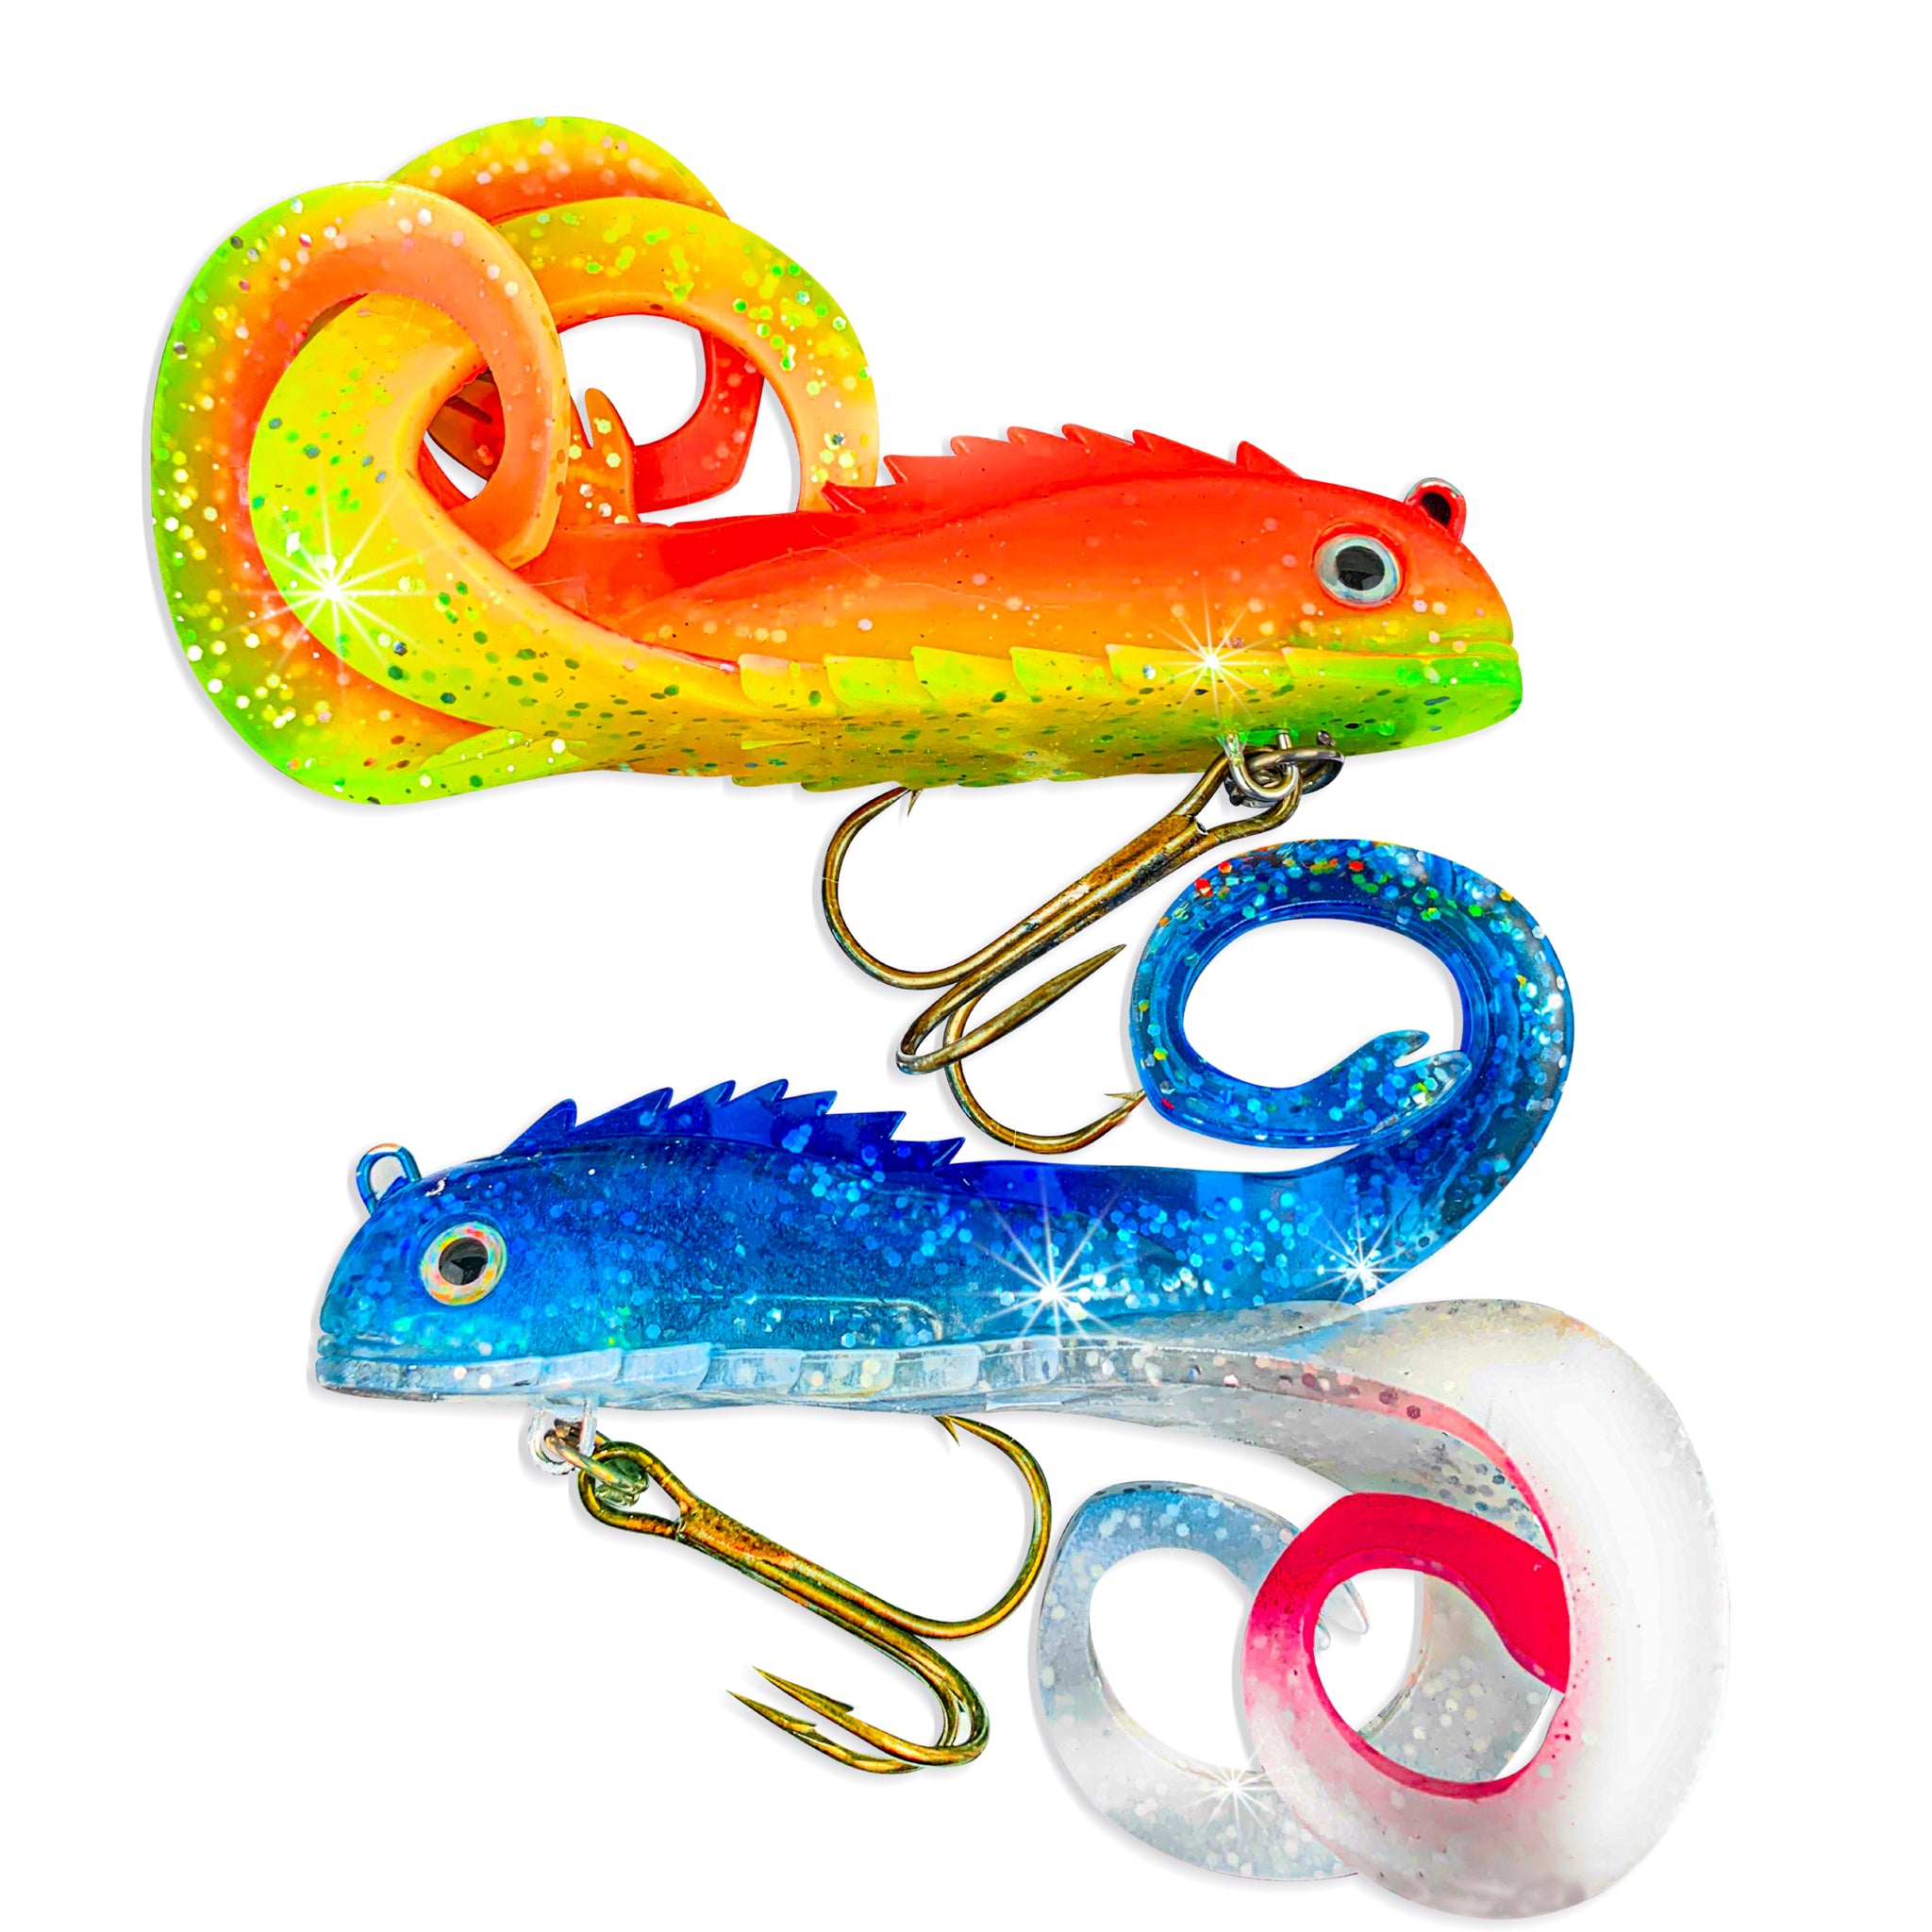 Squidworx 3 tail Pike Slayer Twin Pack – Father Pike